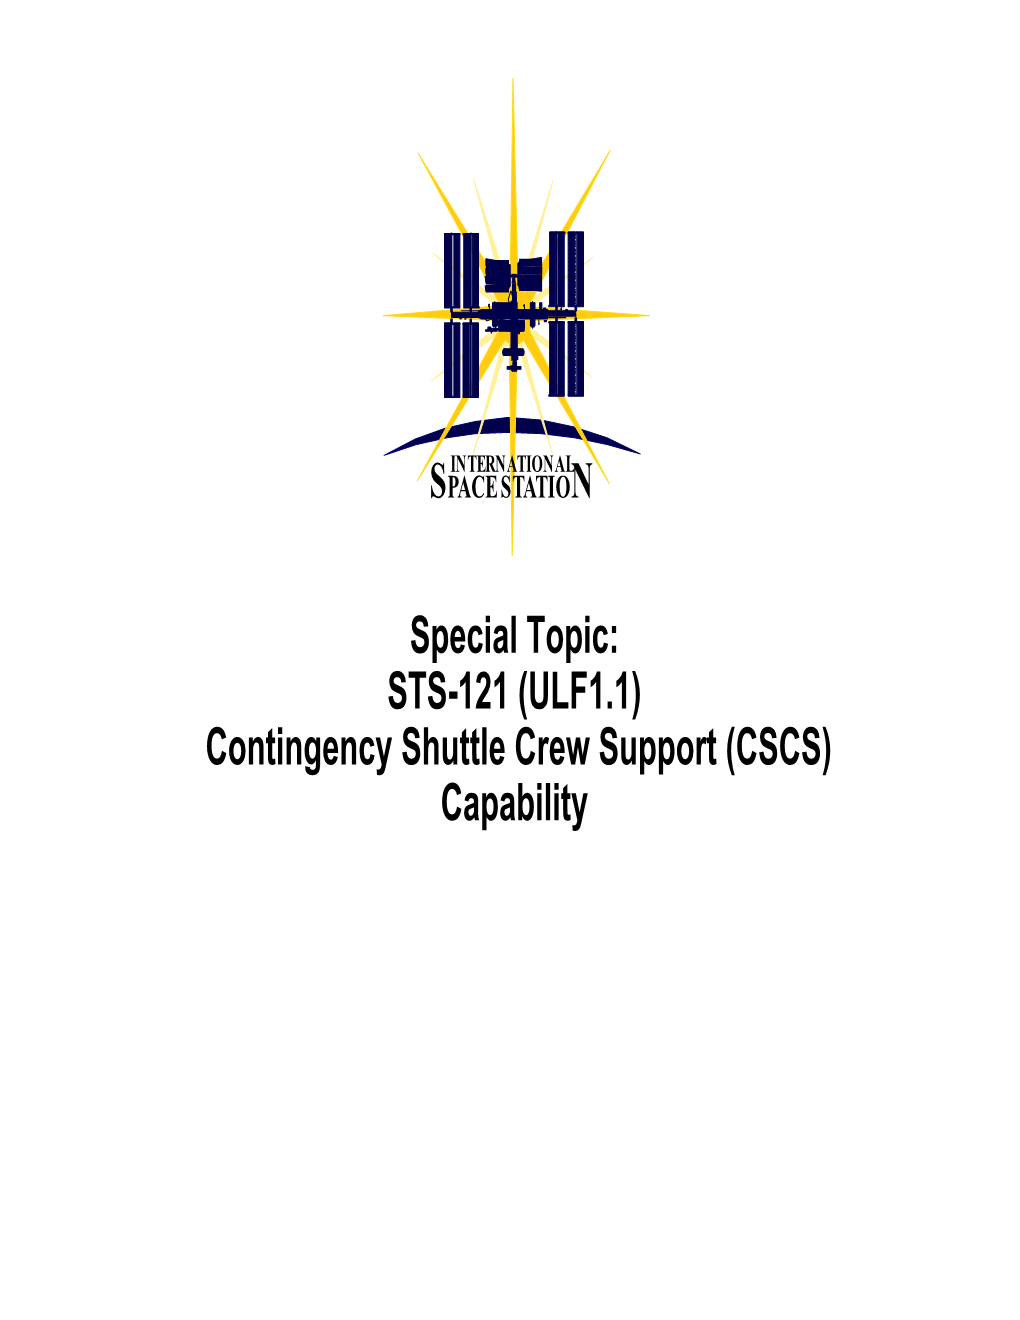 Special Topic: STS-121 (ULF1.1) Contingency Shuttle Crew Support (CSCS) Capability